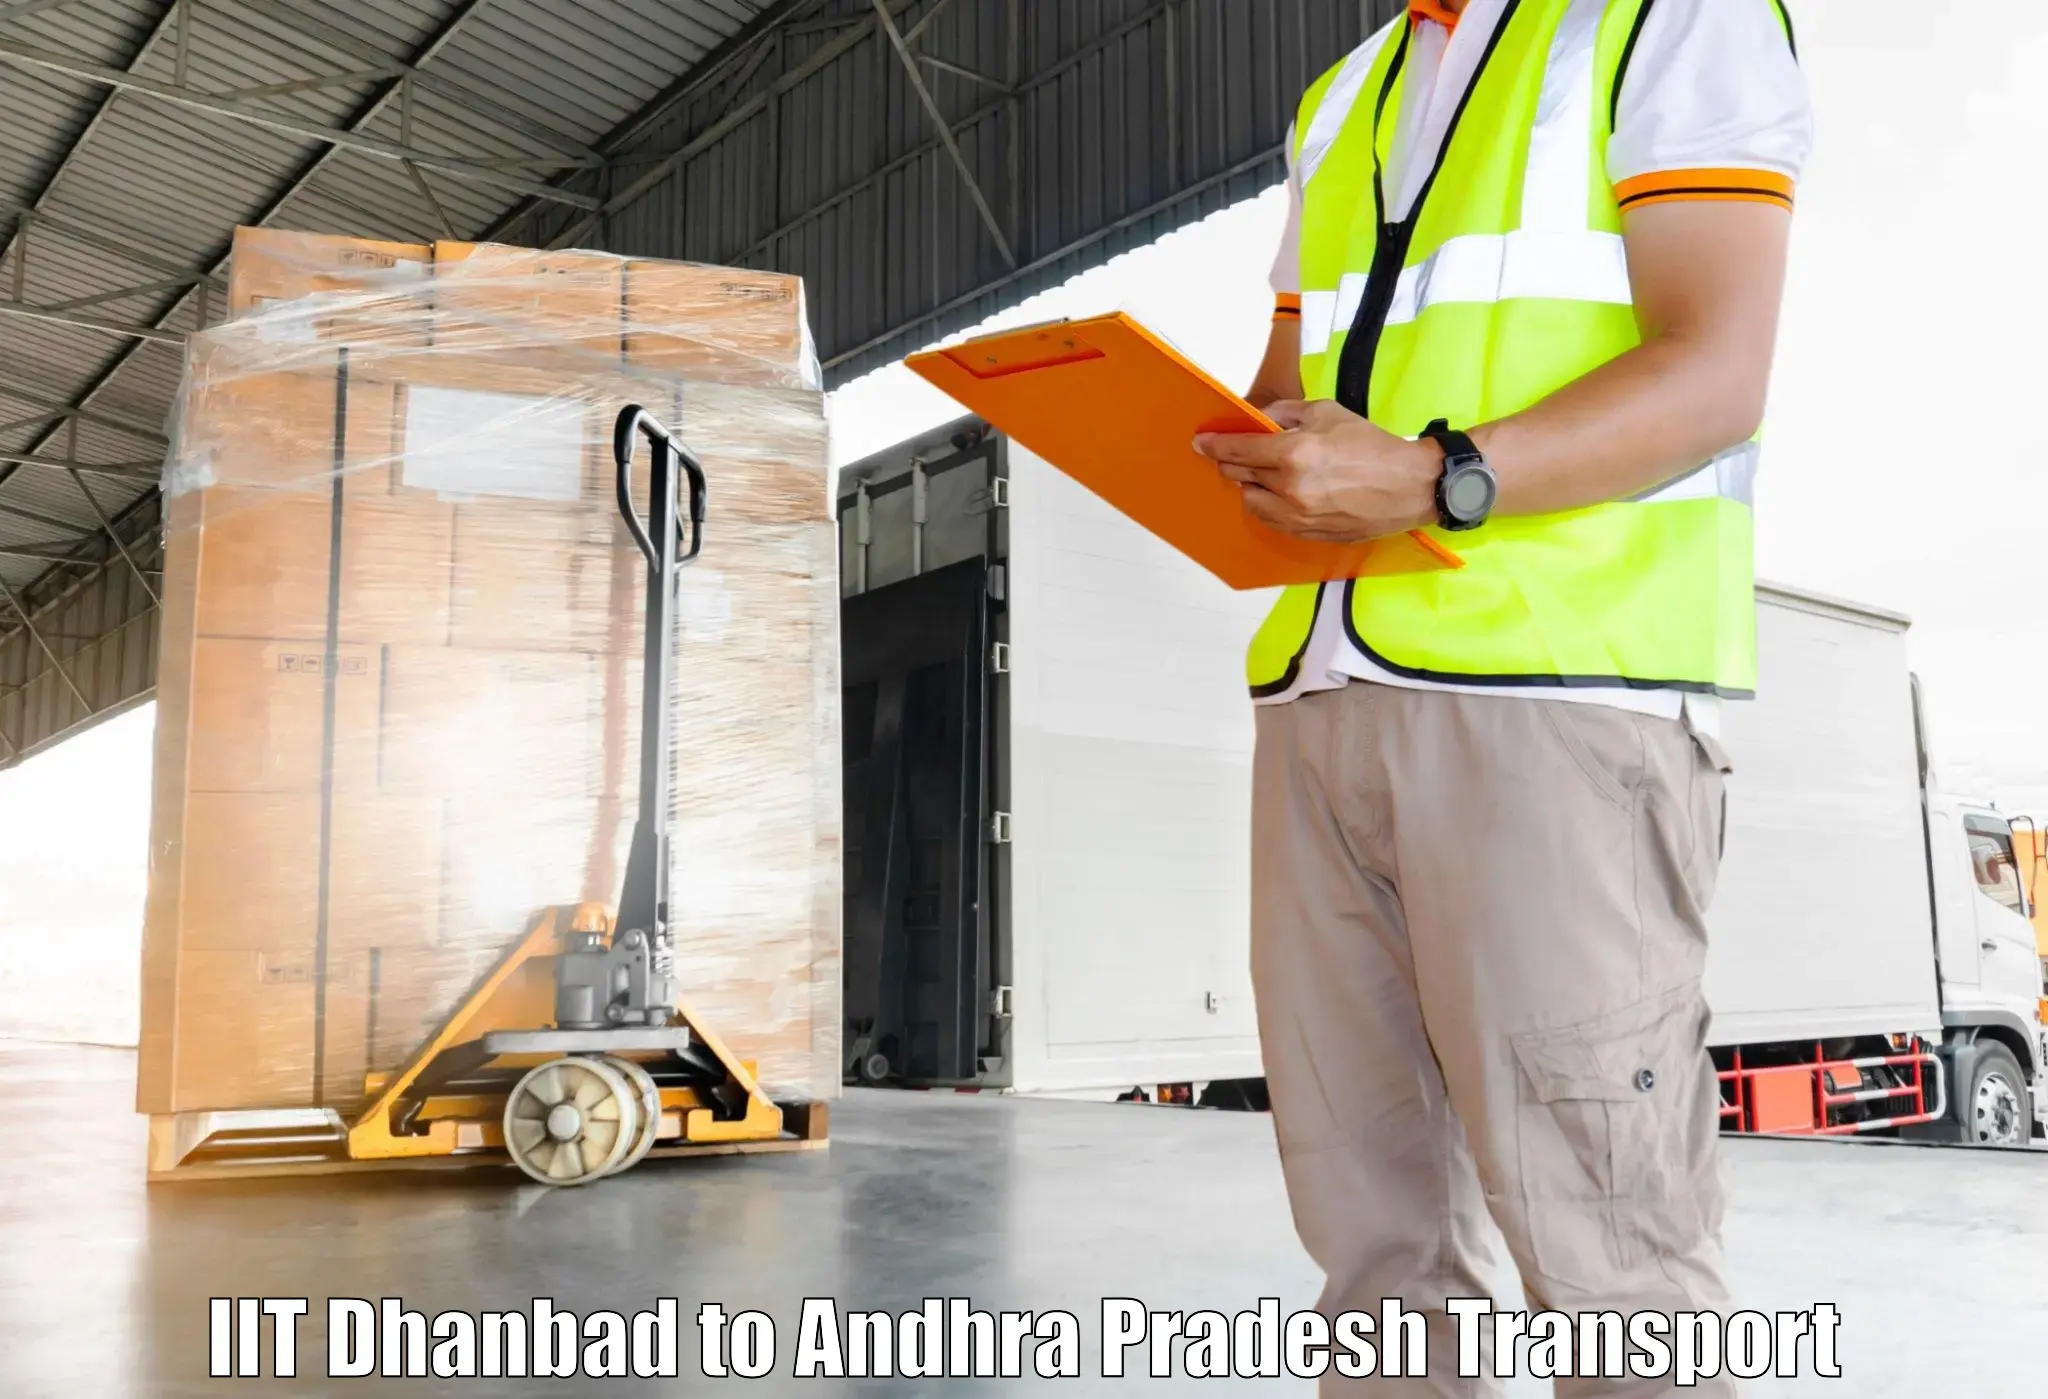 Transportation services IIT Dhanbad to Gollaprollu